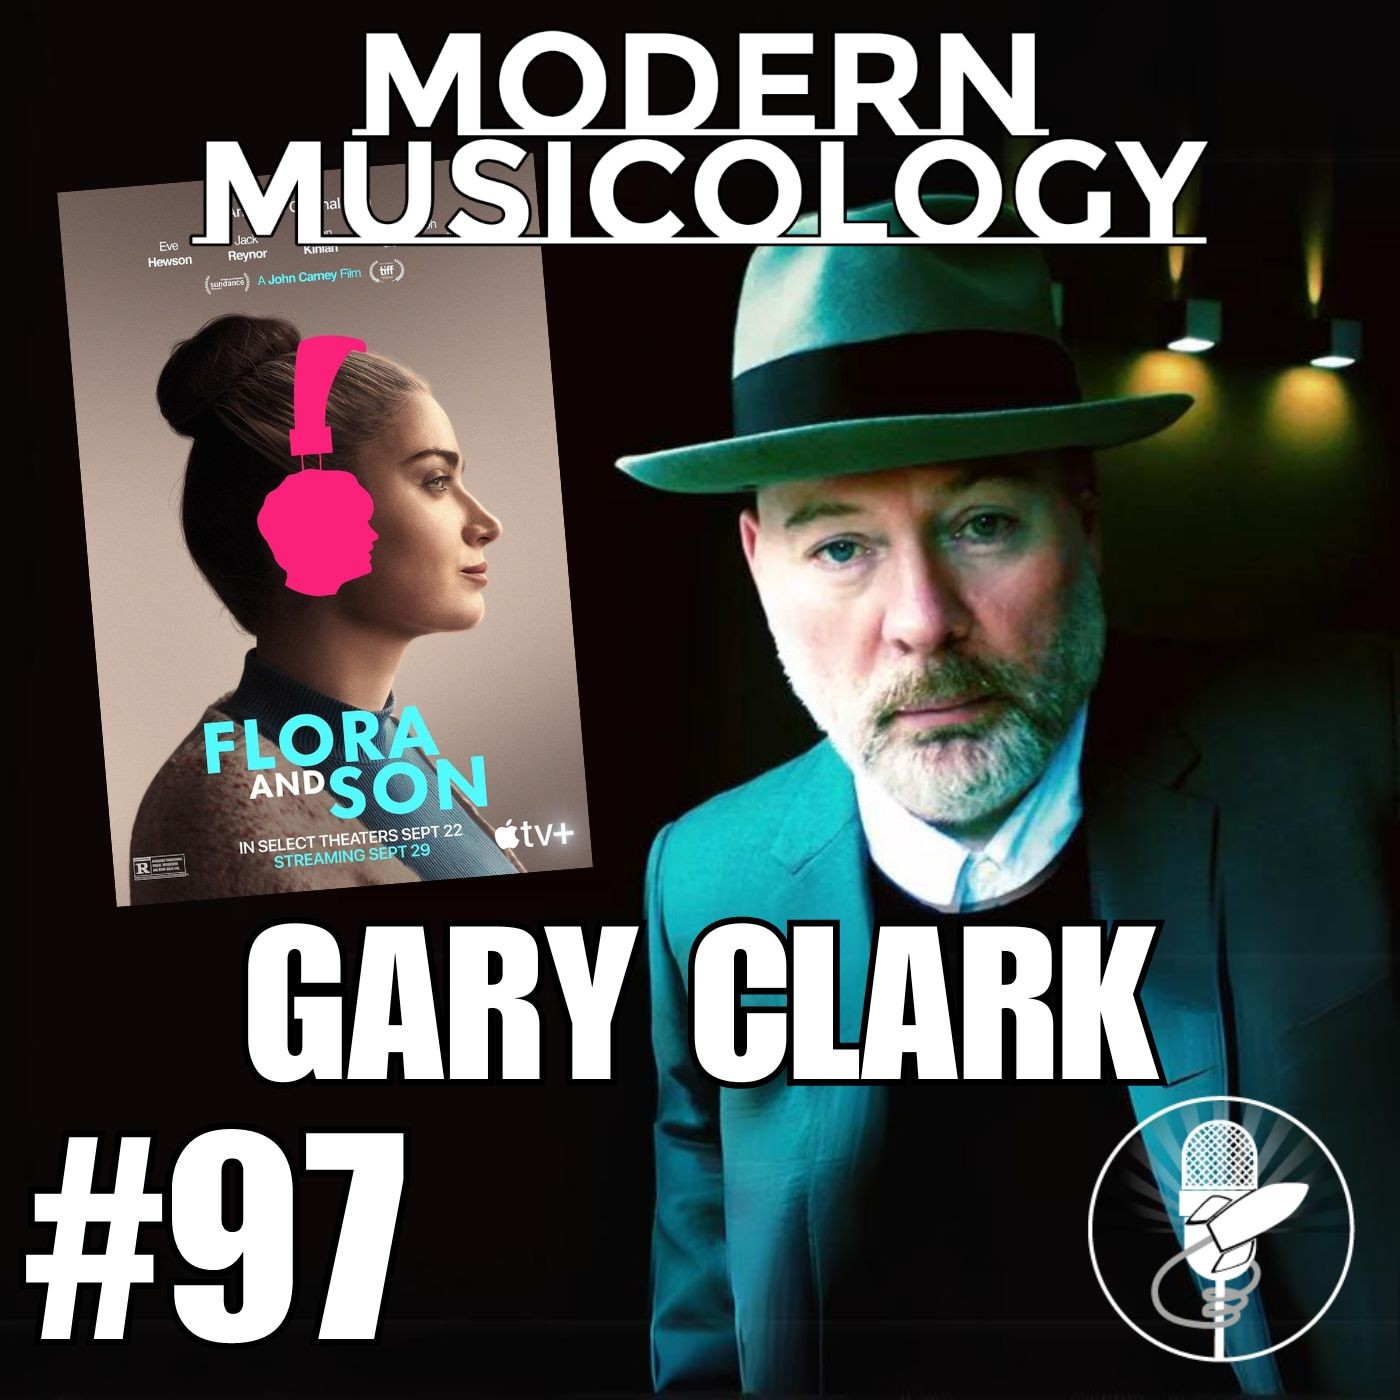 #97 - Interview with GARY CLARK